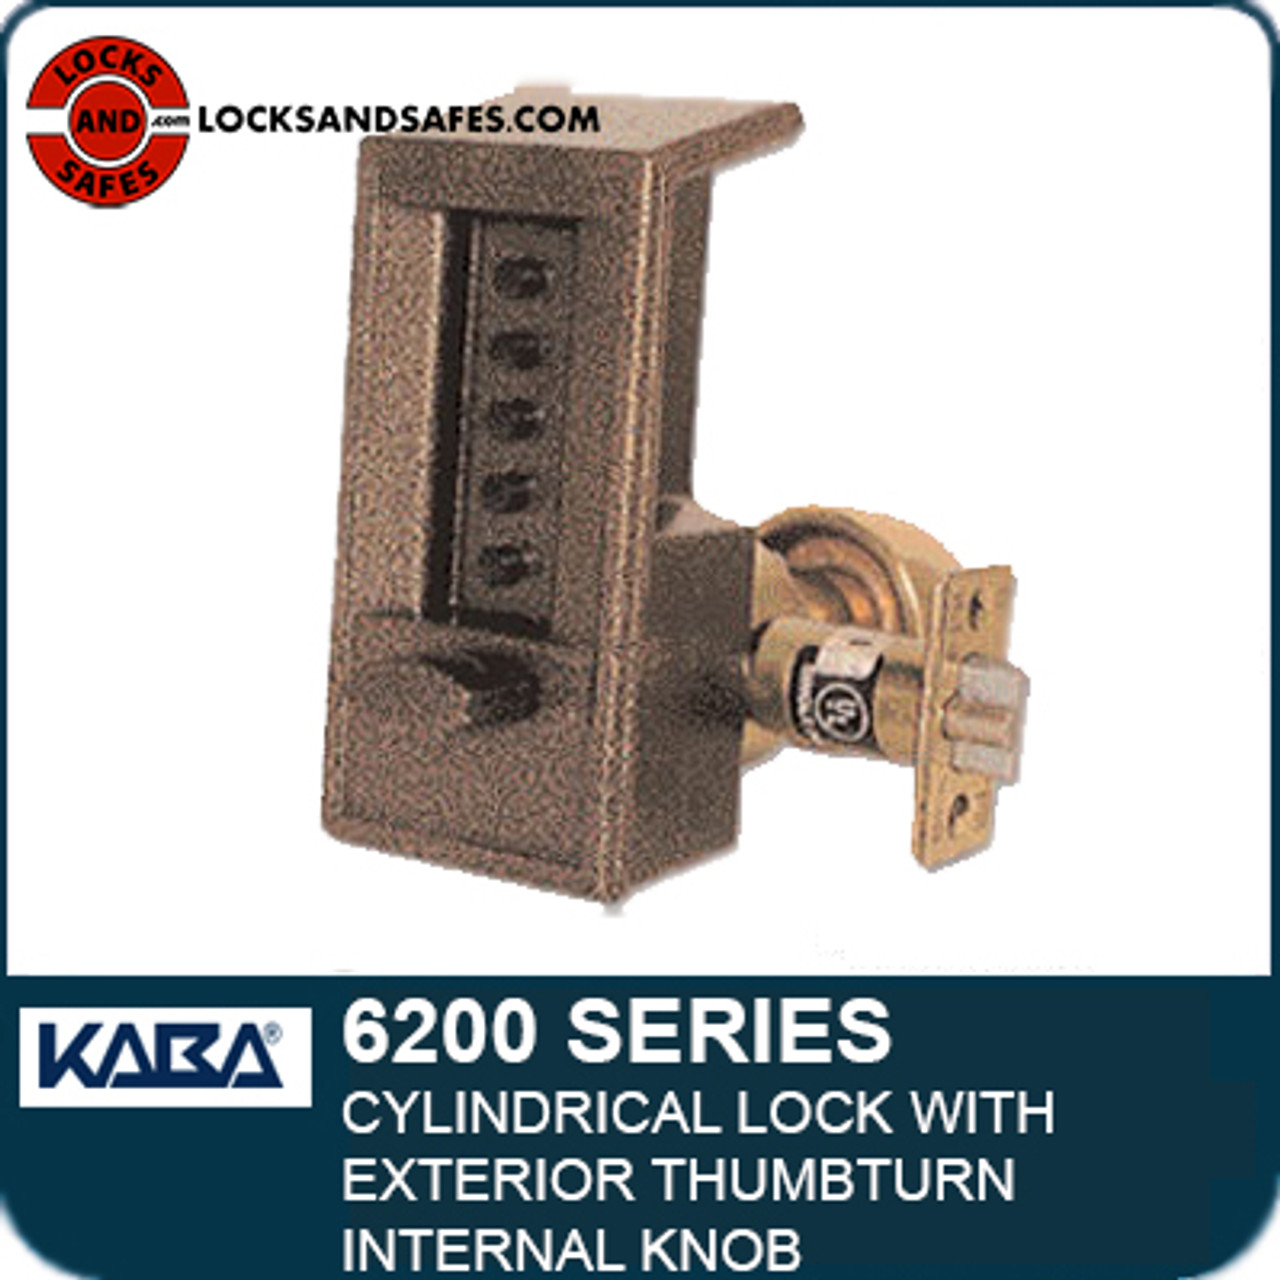 Kaba Simplex L1000 Series Metal Mechanical Pushbutton Cylindrical Lock with Lever, Combination Entry, Key Override and Passage, 13mm Throw Latch, Floa - 4